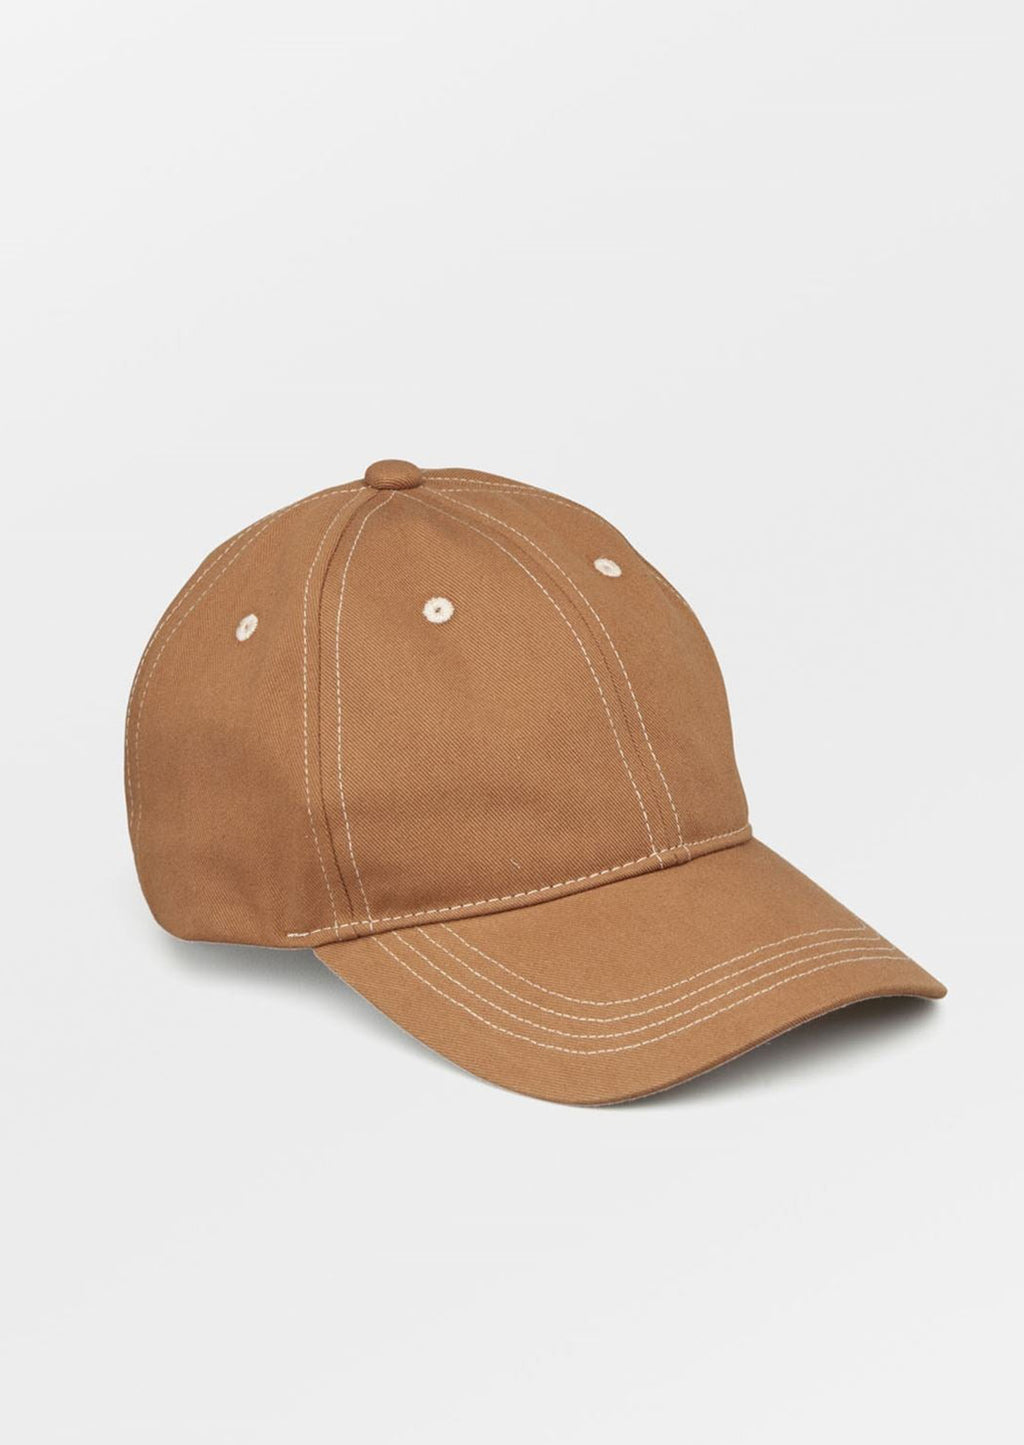 Toffee: A brown color baseball cap with contrast white stitching.